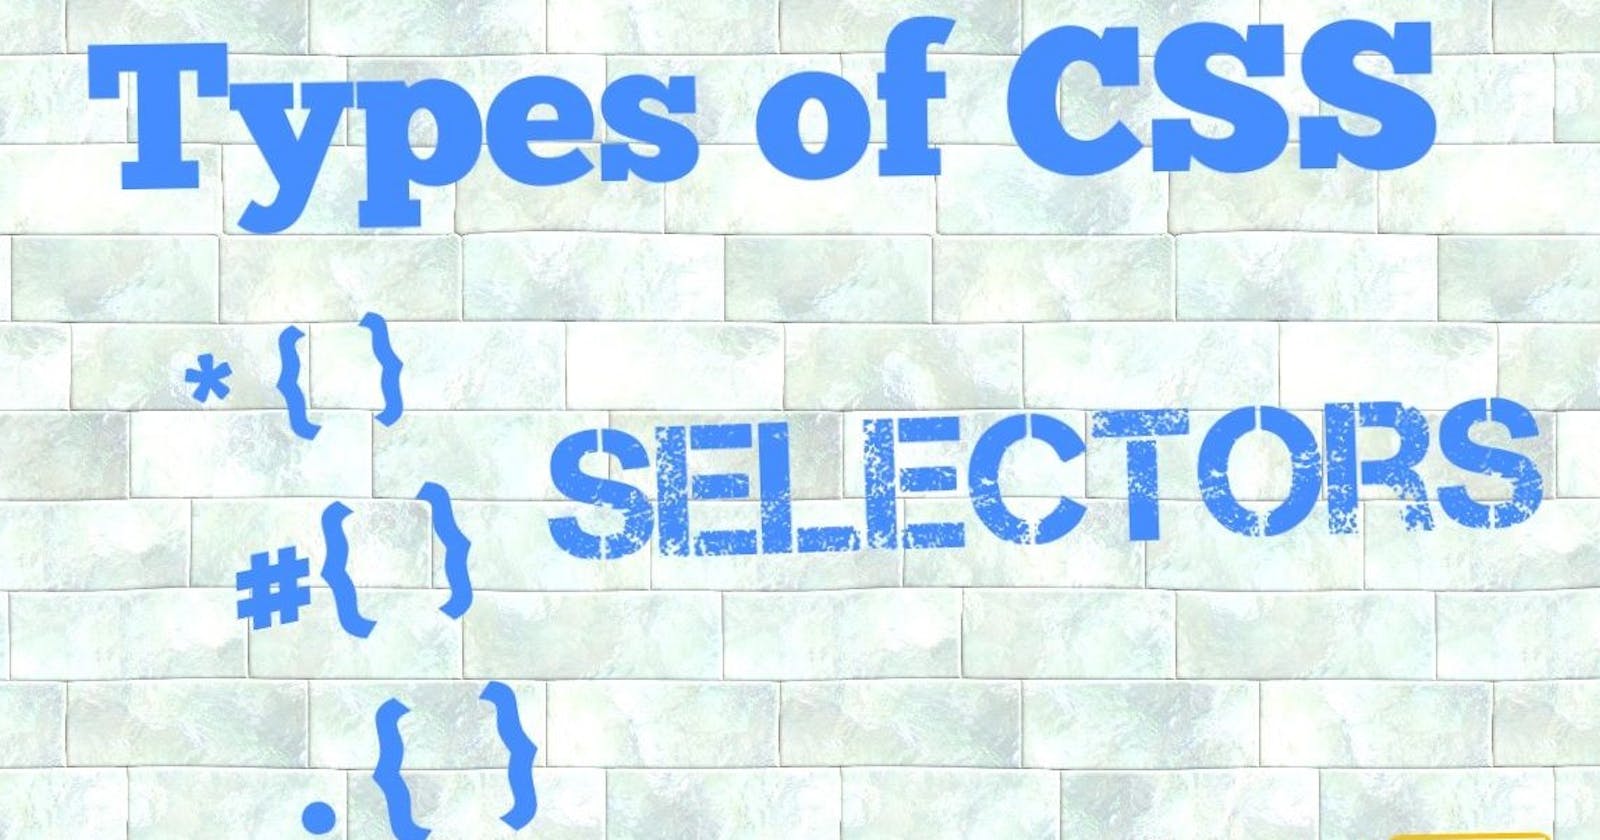 Types of CSS Selectors